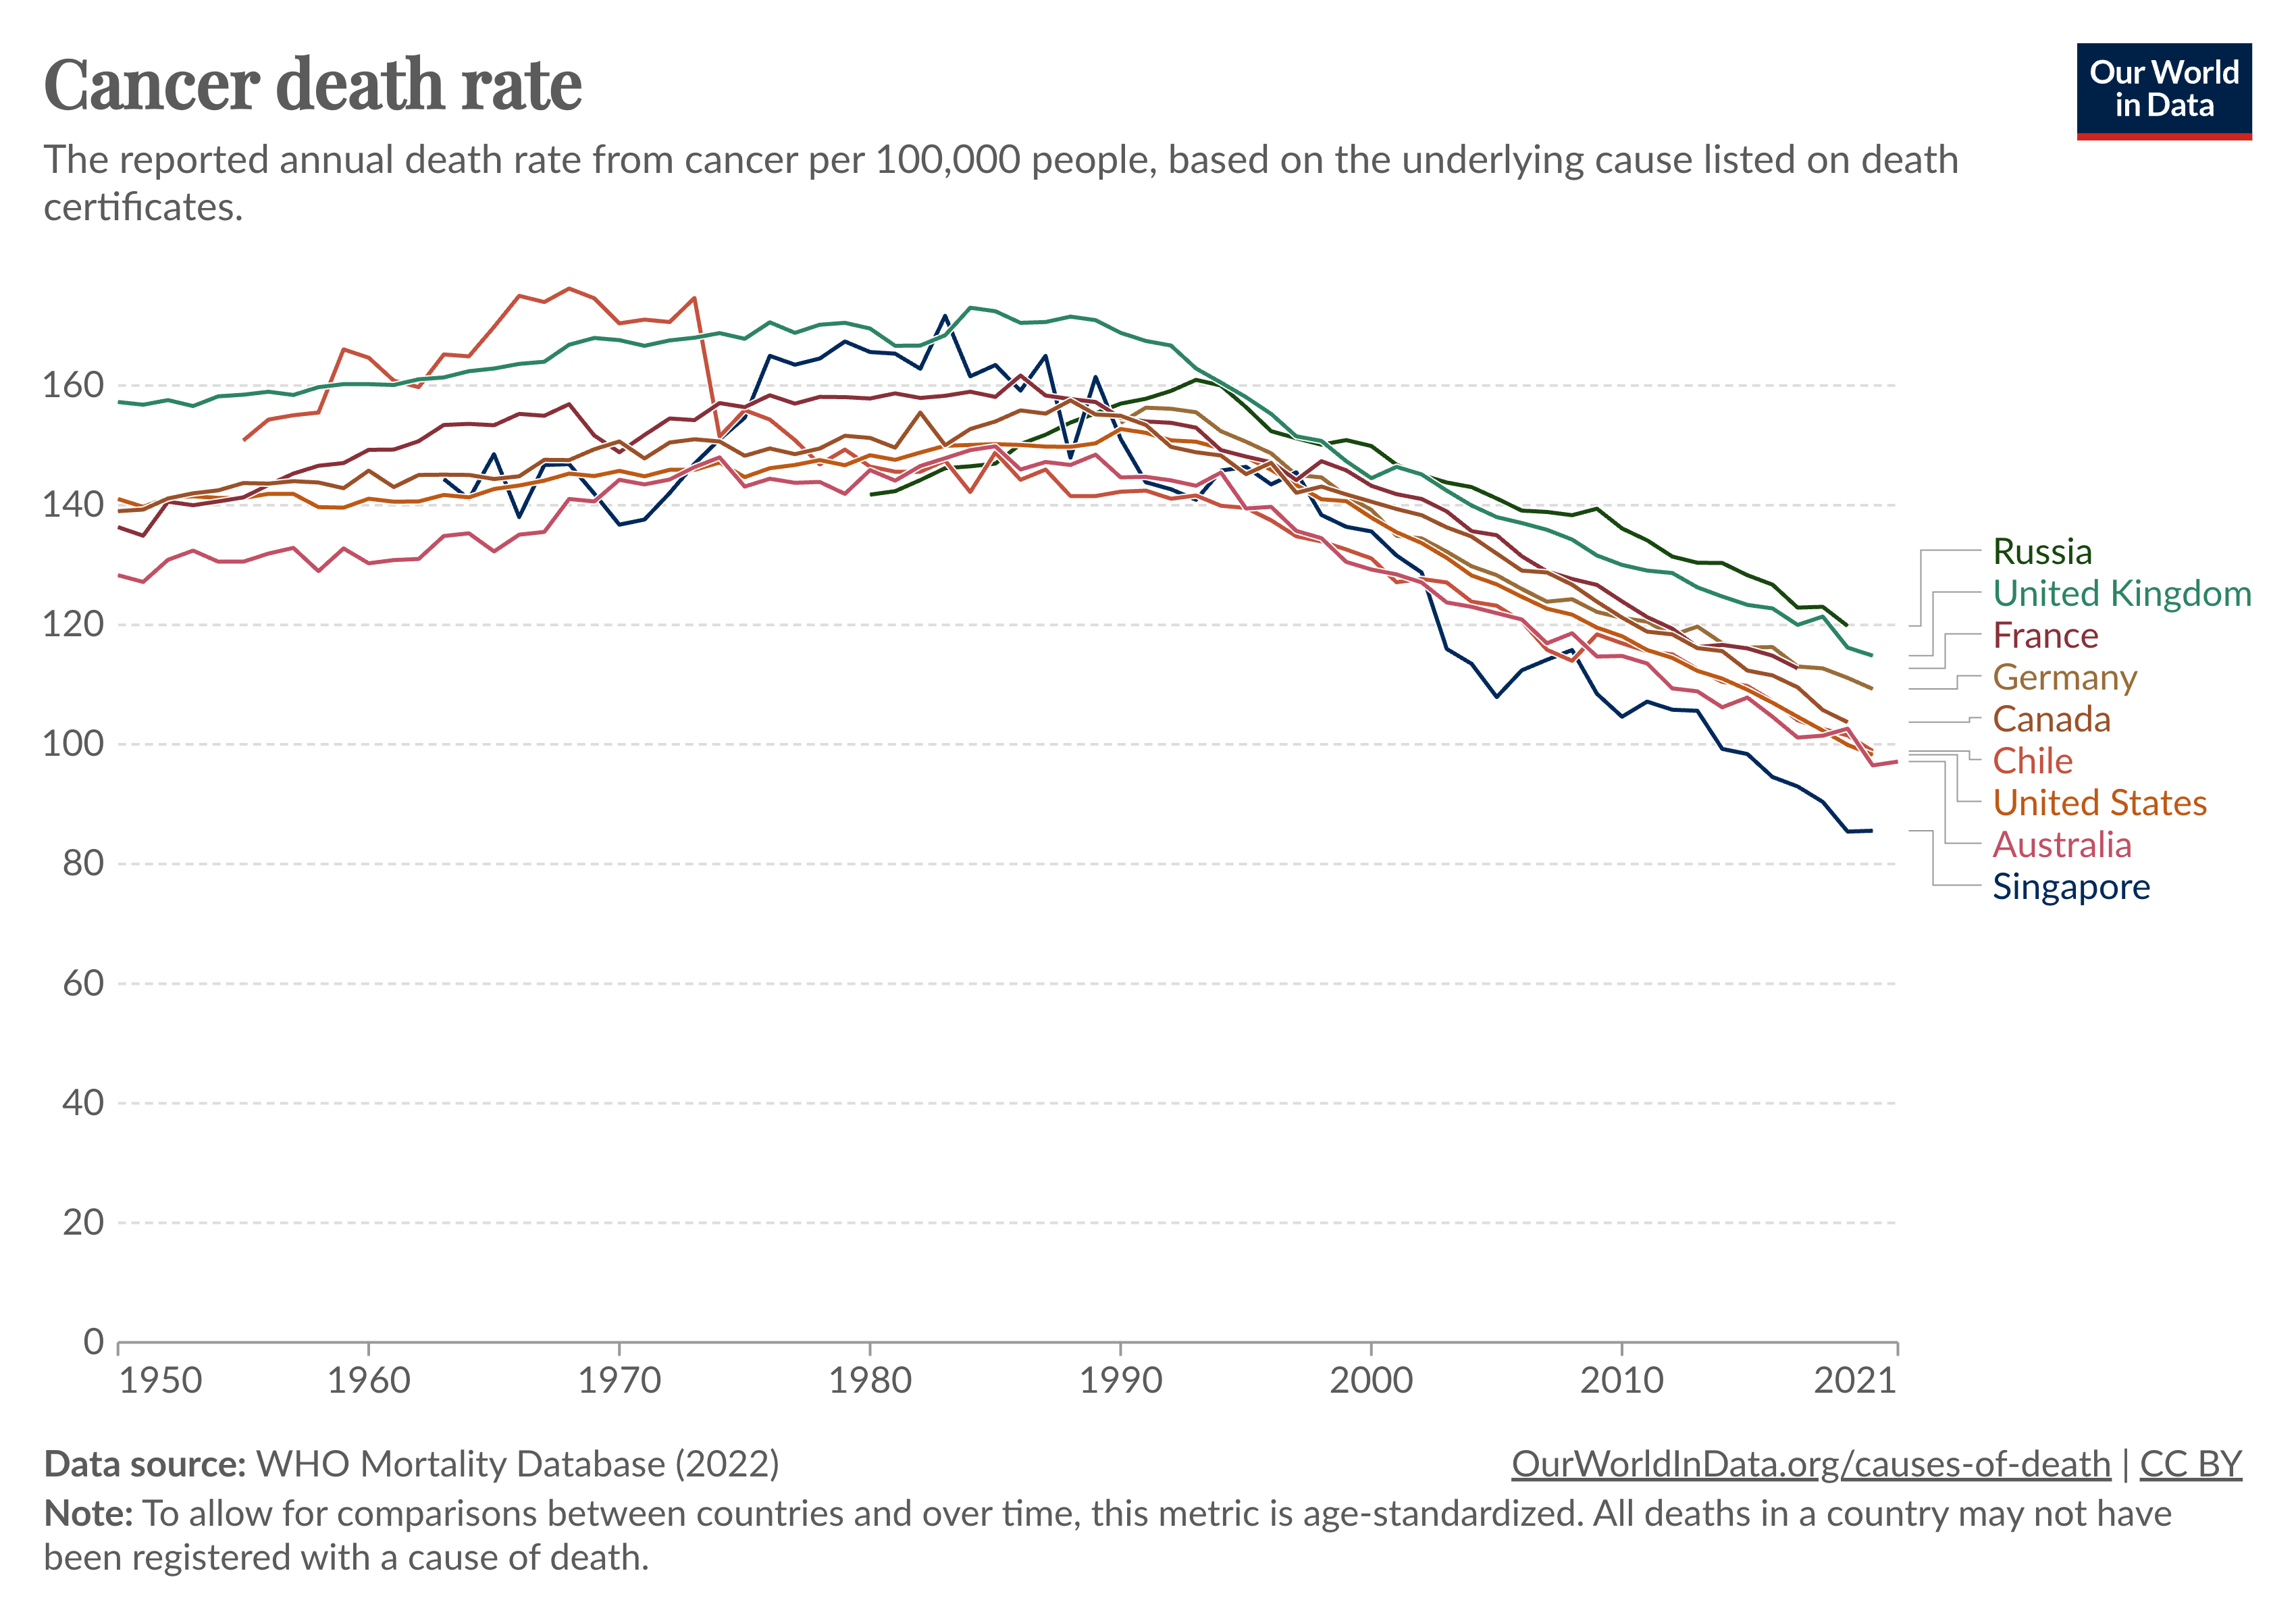 Line chart showing the cancer death rate in a range of countries since the 1950s. Large declines are seen in these countries.